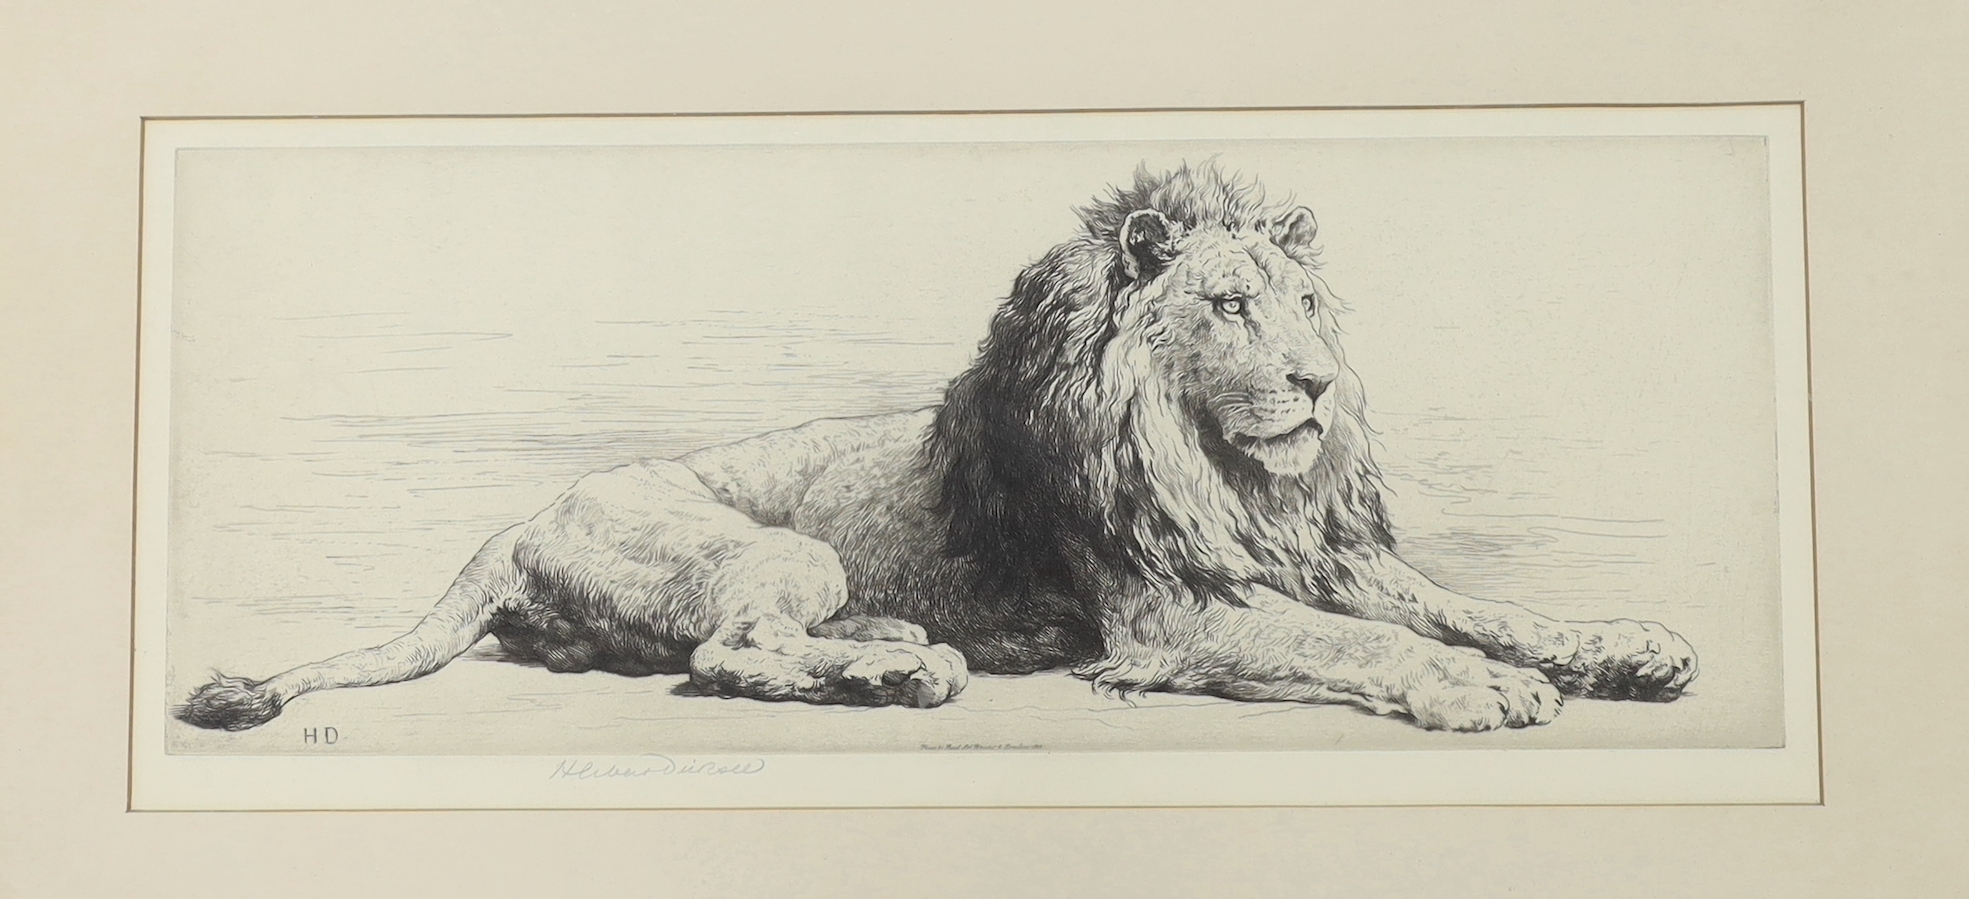 Herbert Dicksee (1862-1942), etching, Study of a Lion, signed in pencil, one of 150 signed proofs, publ. 1915, 20 x 50cm